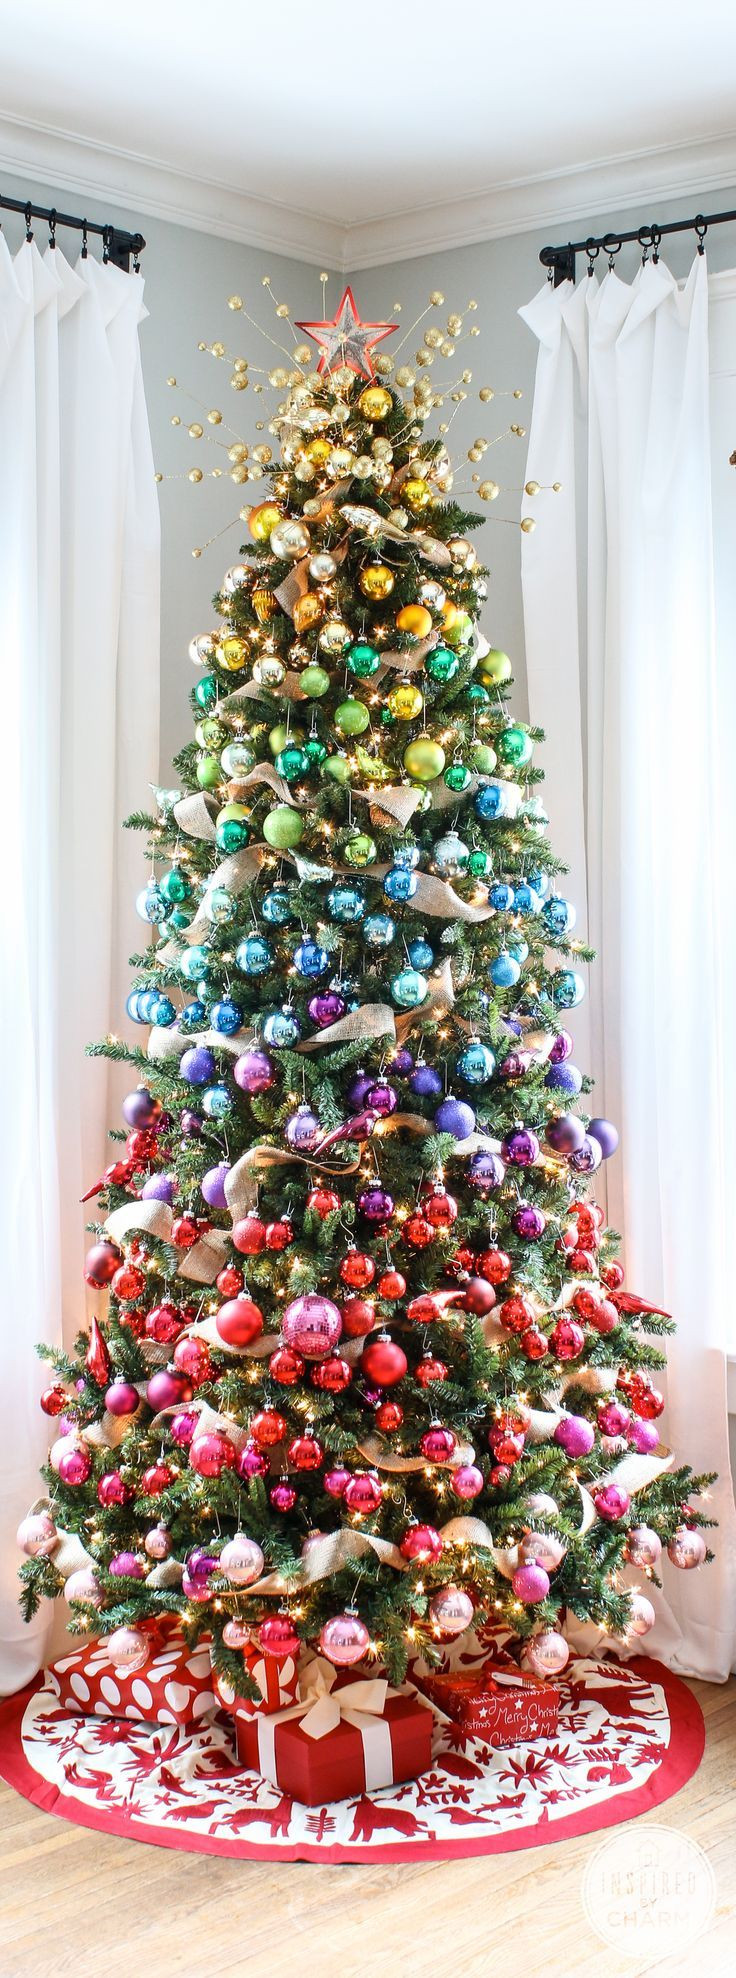 DIY Christmas Tree Ideas
 DIY Unique Christmas Trees Ideas You Should Try This Year